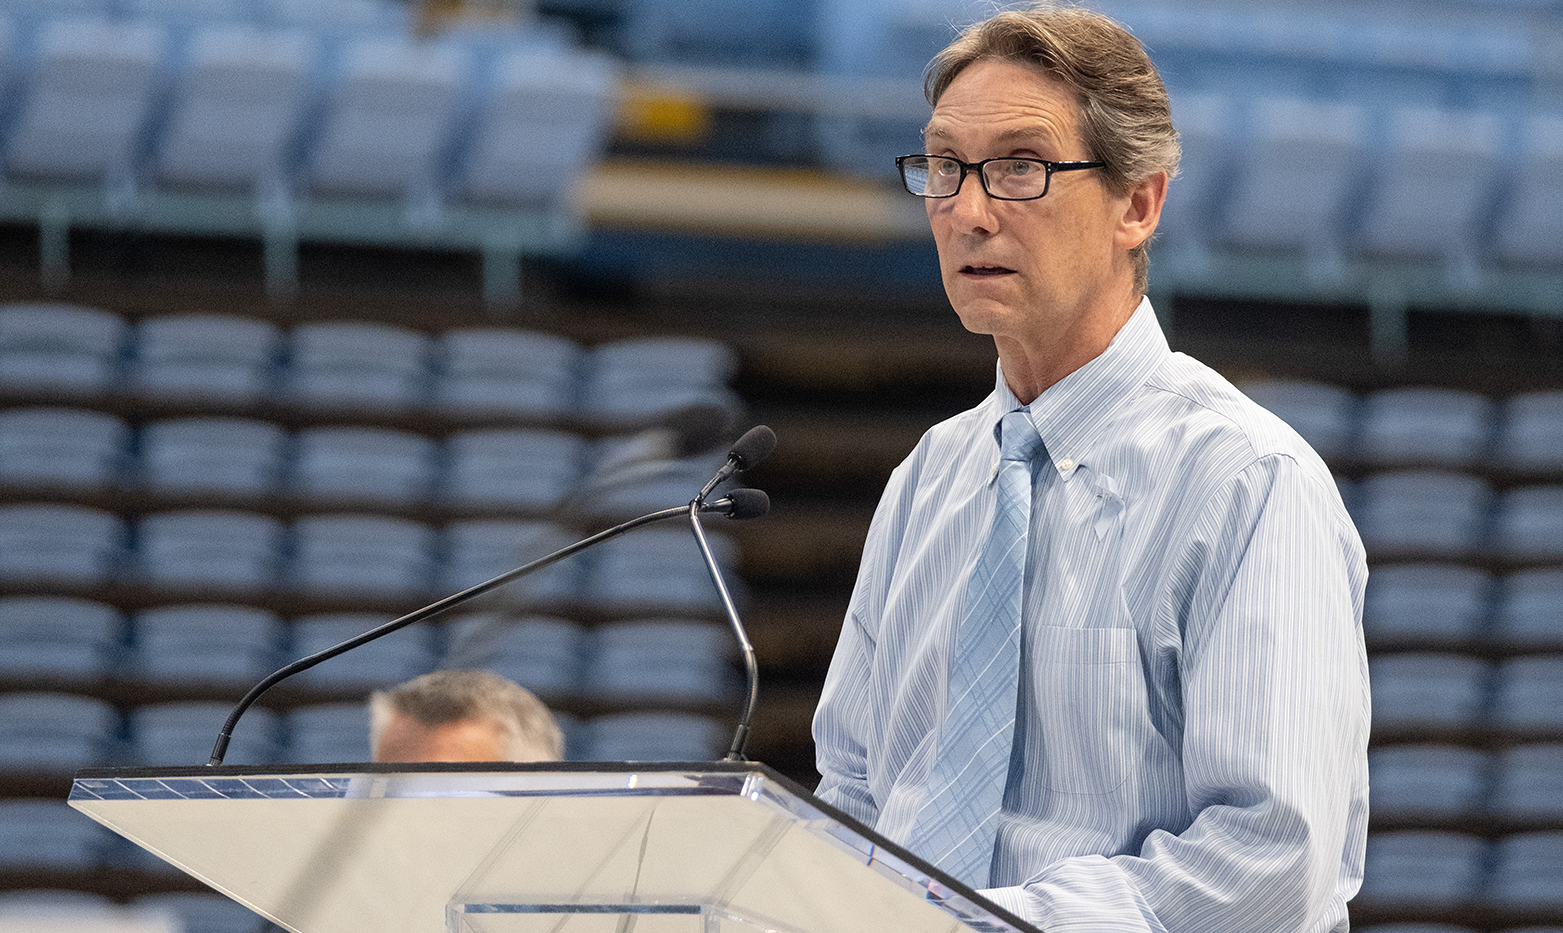 A man, Jim White, speaking at a podium in an arena at a vigil.